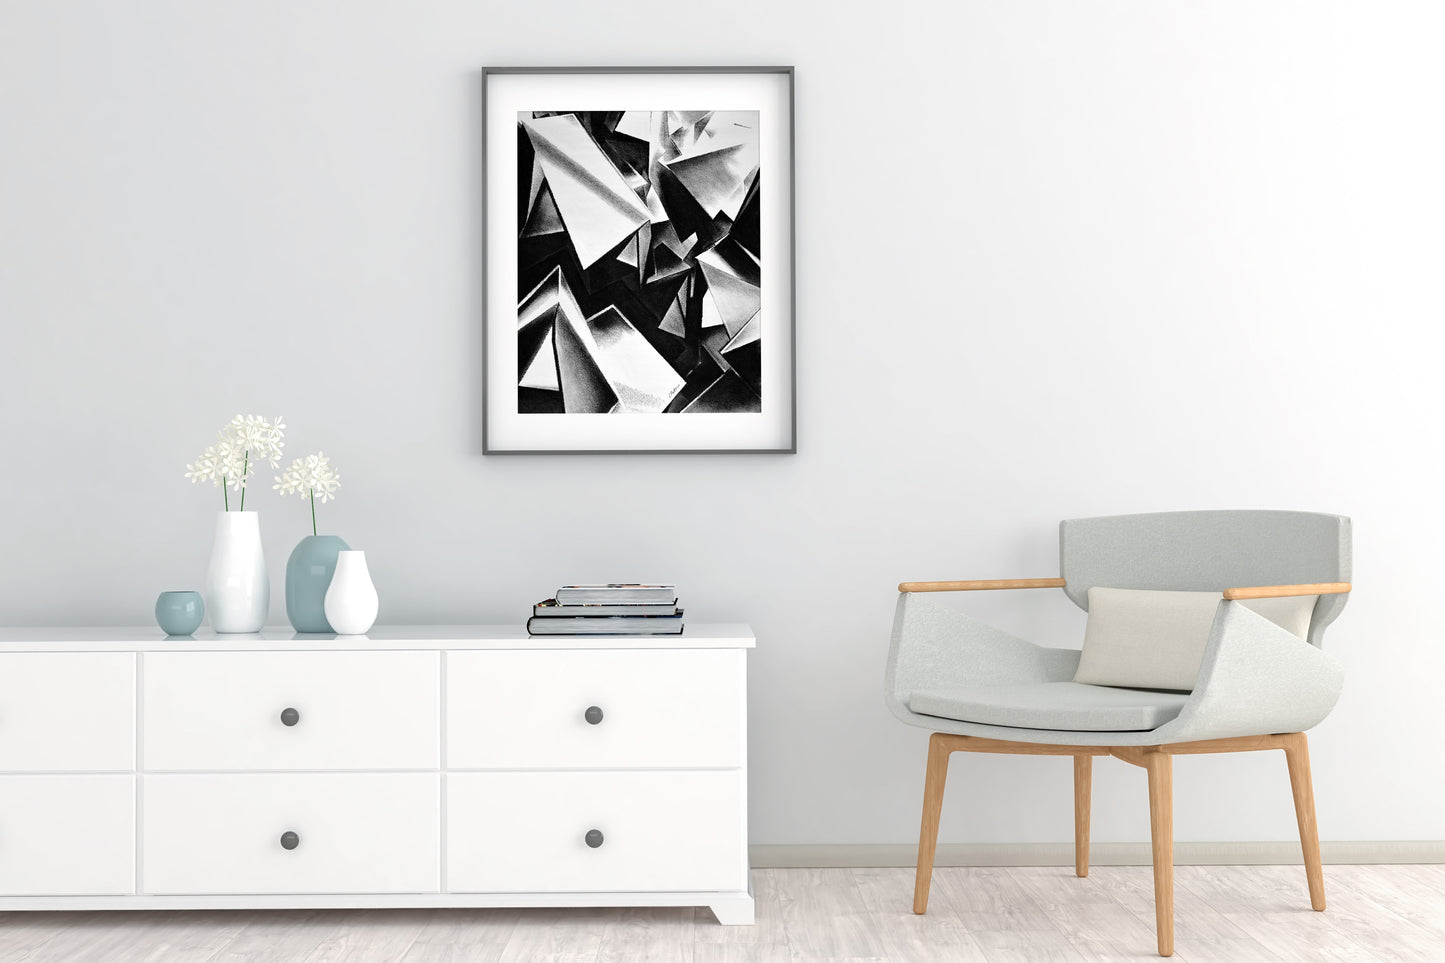 Chaotic Structure -  Unframed Satin Poster Print, Wall Art, Charcoal, Abstract Black and White Decor